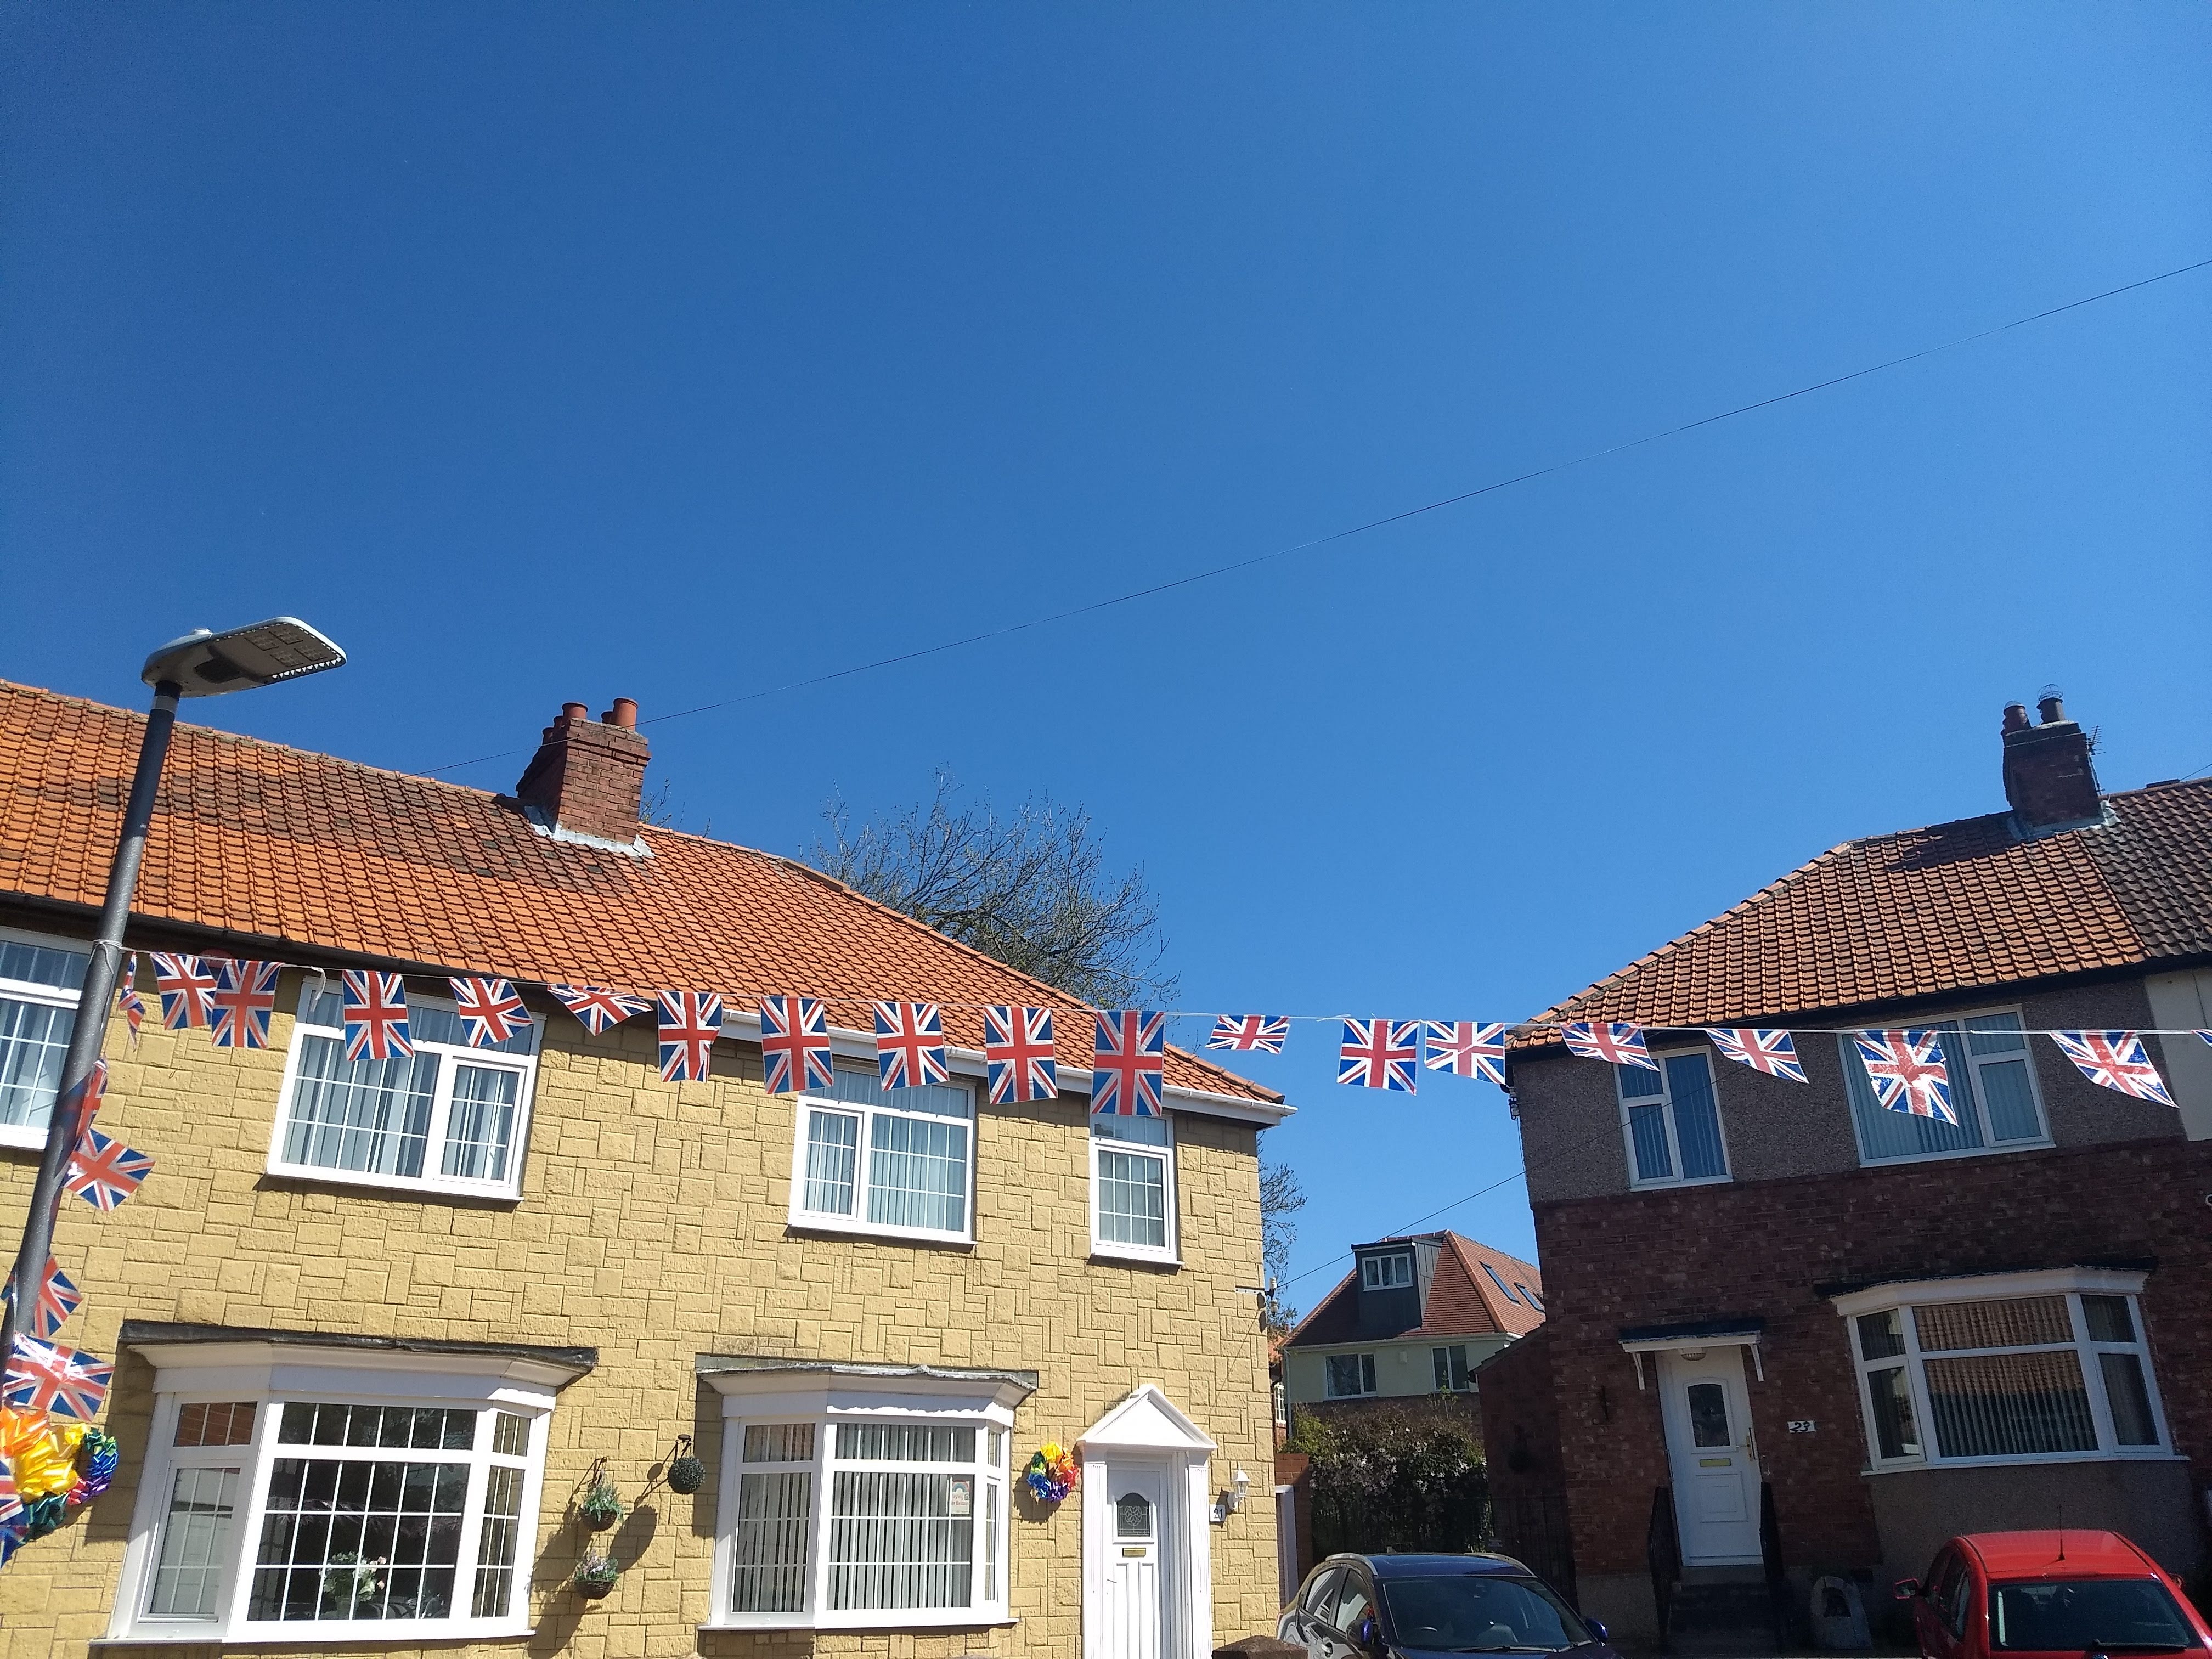 VE Day bunting in a street